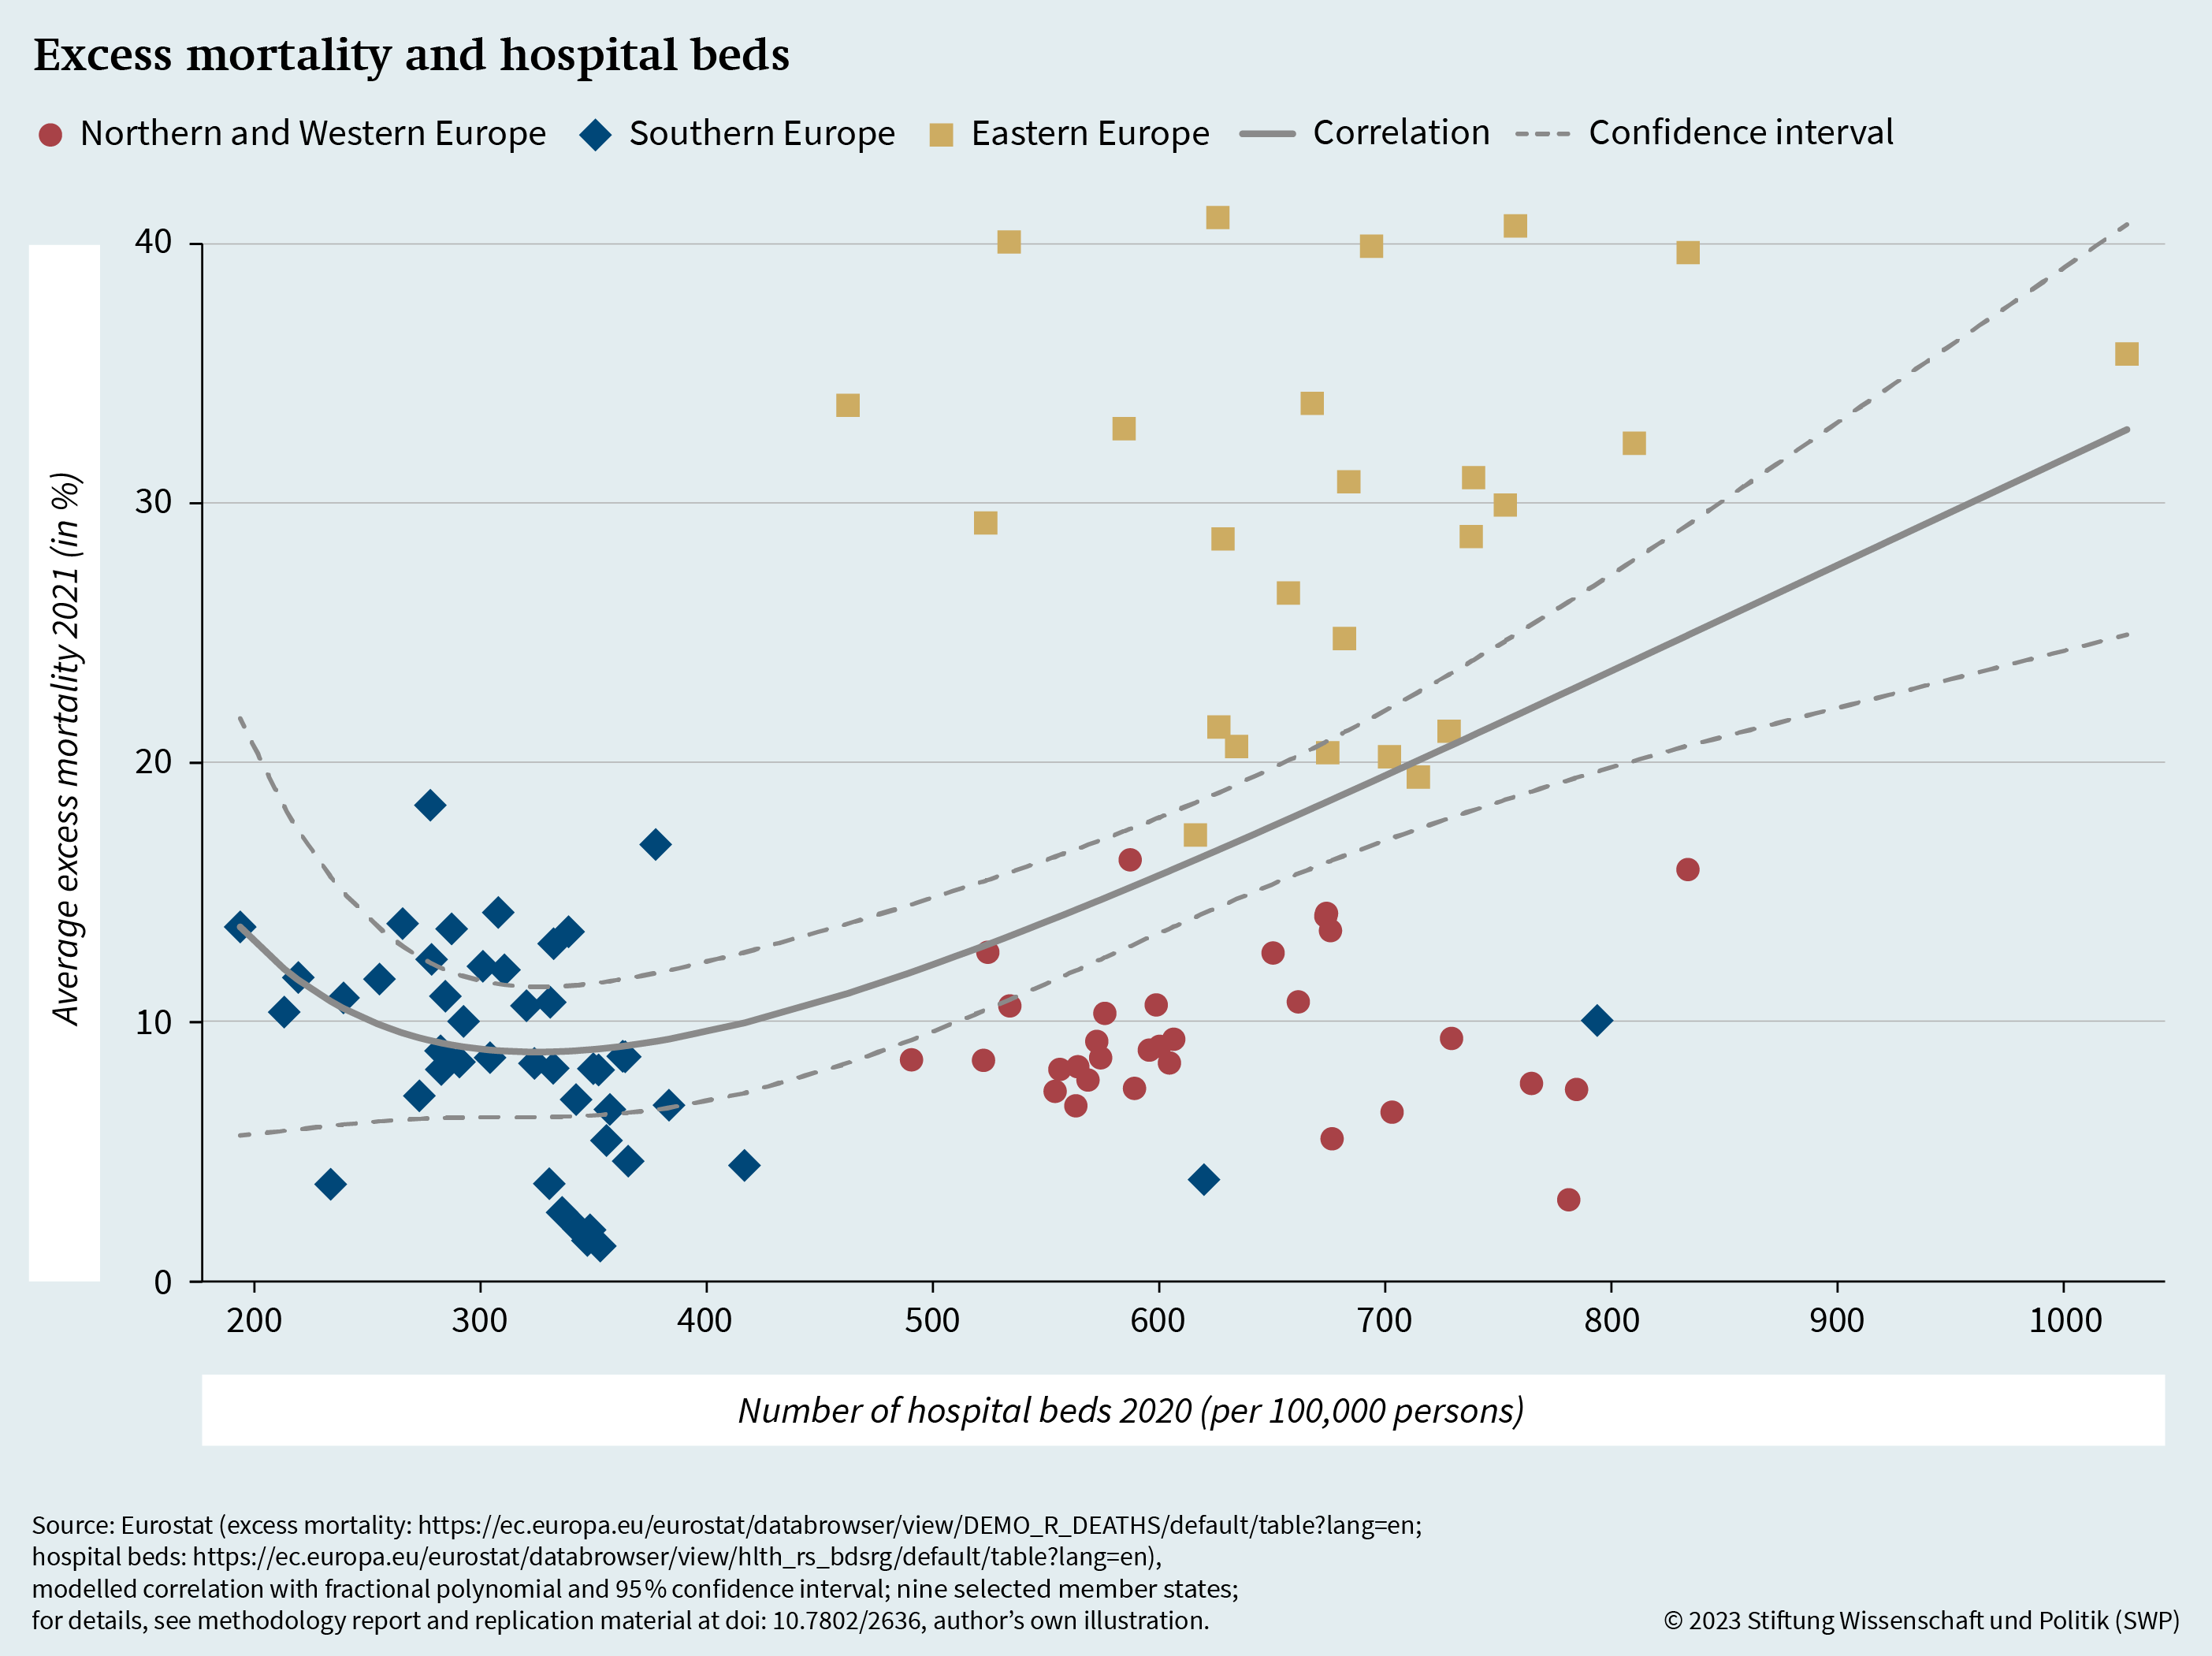 Figure A.2: Excess mortality and hospital beds